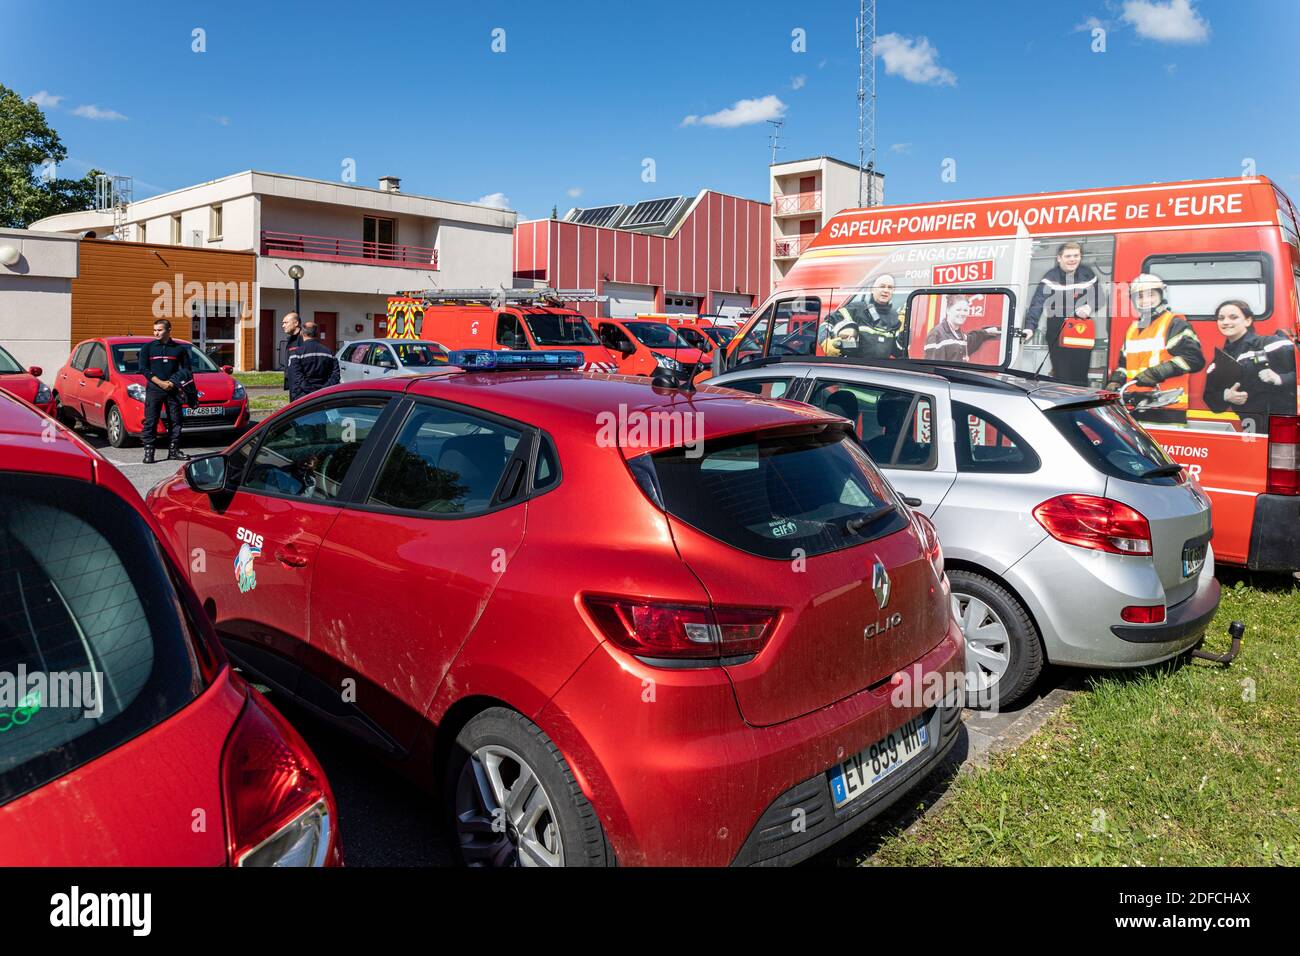 PARKING LOT AT THE SDIS27, FIREFIGHTER, FIRE AND EMERGENCY SERVICE OF THE EURE, EVREUX, FRANCE Stock Photo